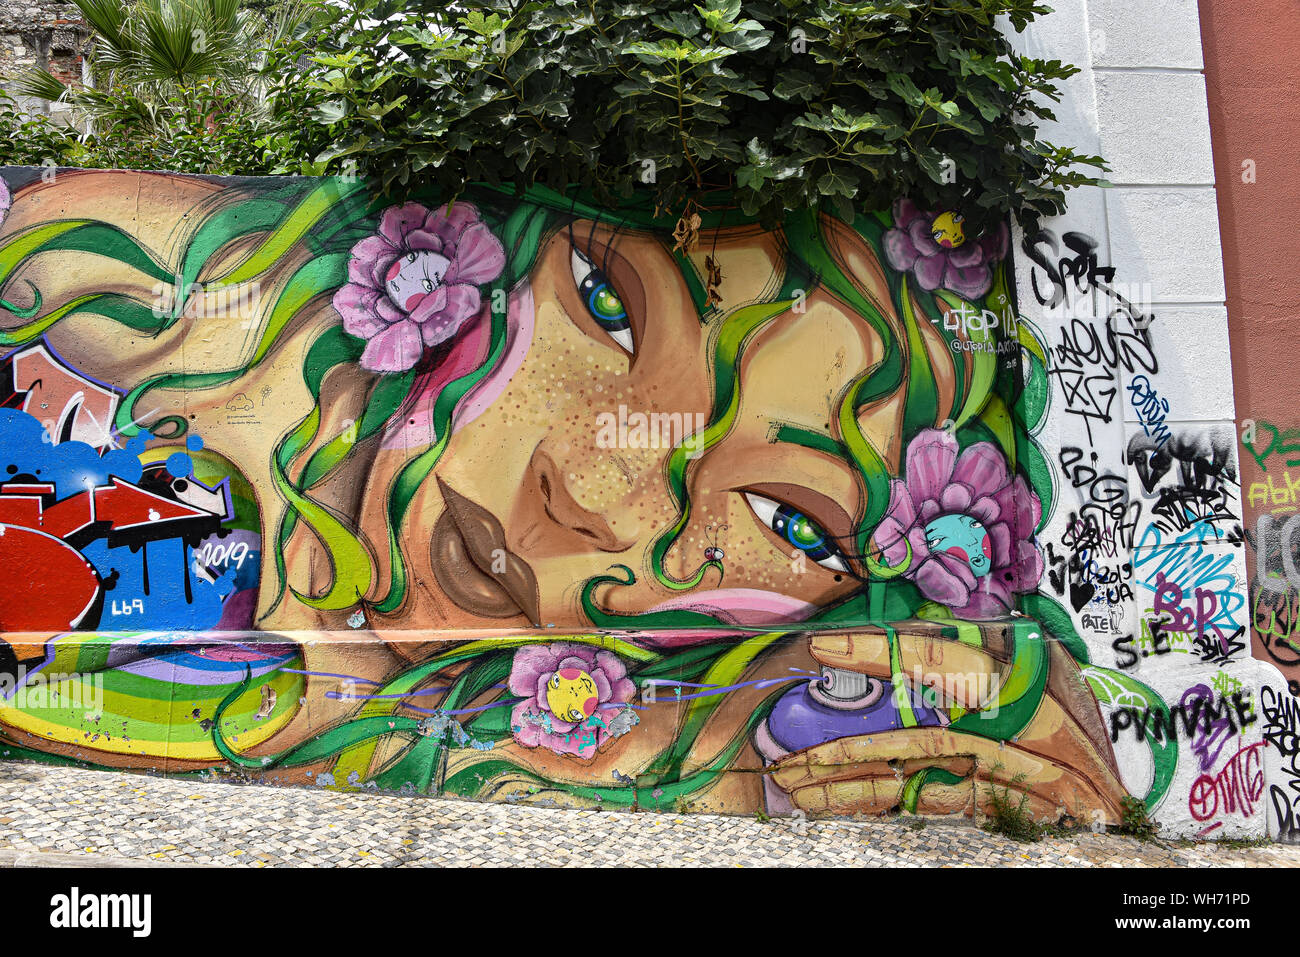 Lisbon, Portugal - July 27, 2019: Examples of colorful Graffiti art on the streets of Lisbon Stock Photo